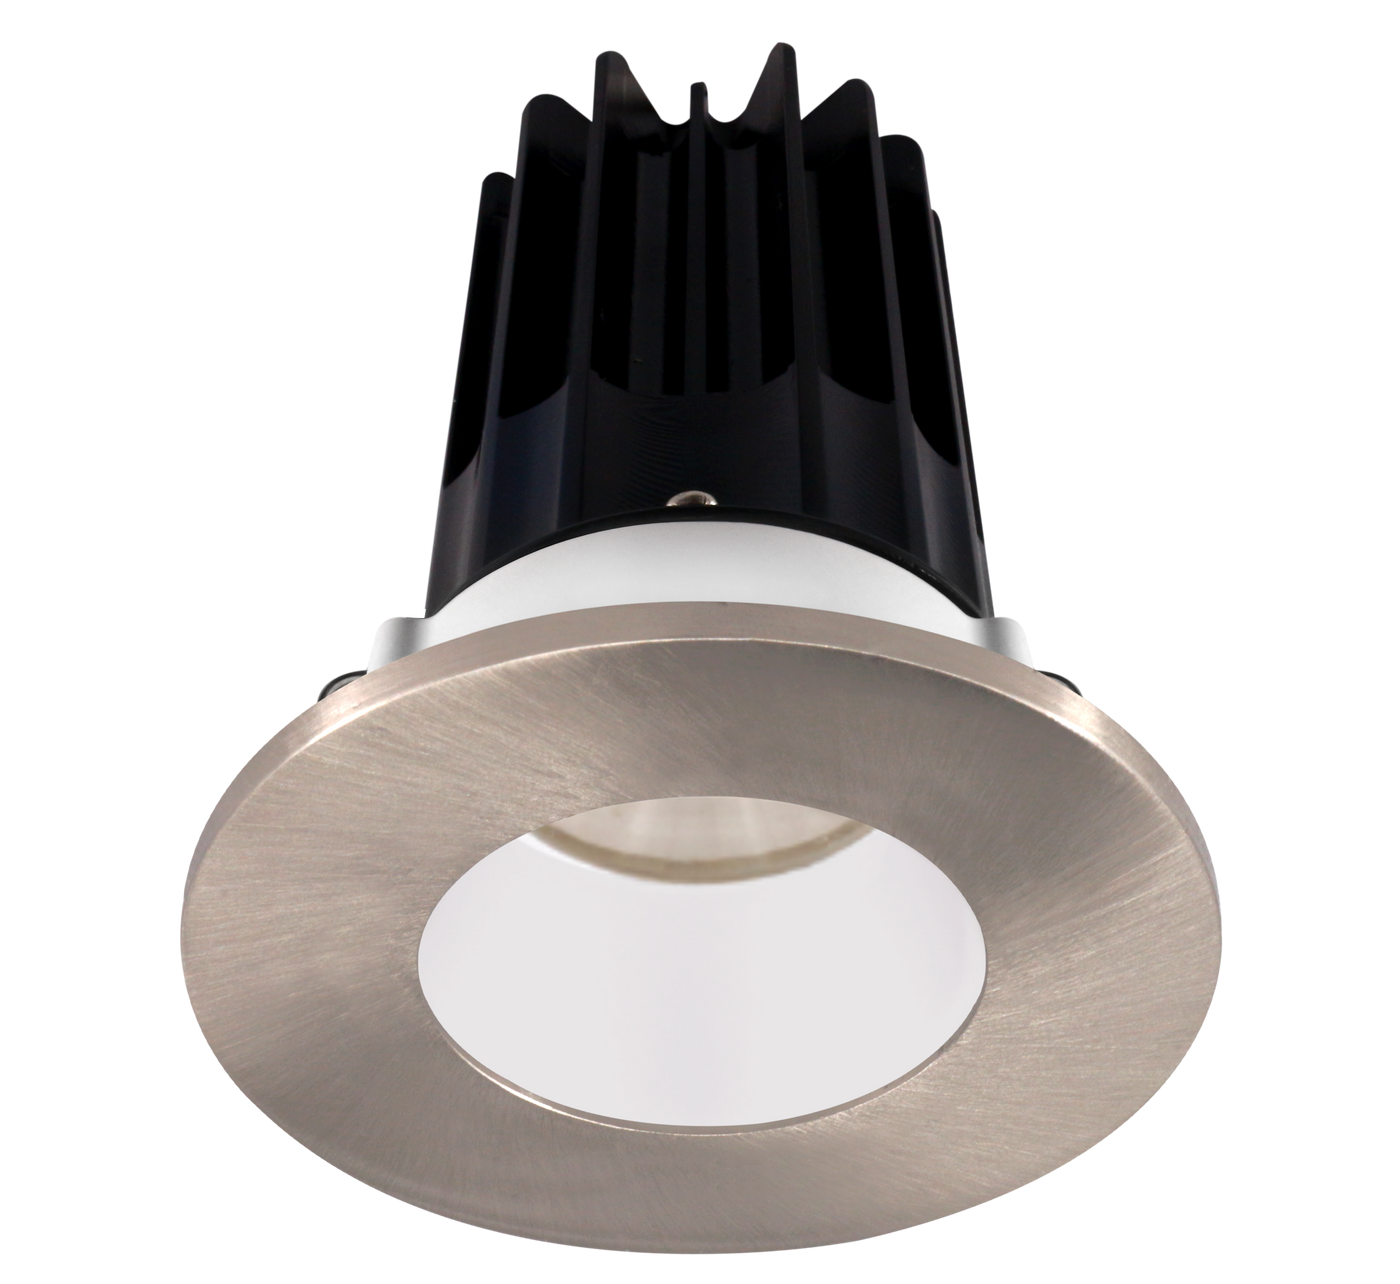 2" Recessed LED, 8W, 3000K, Multiple Reflectors and Round Trims